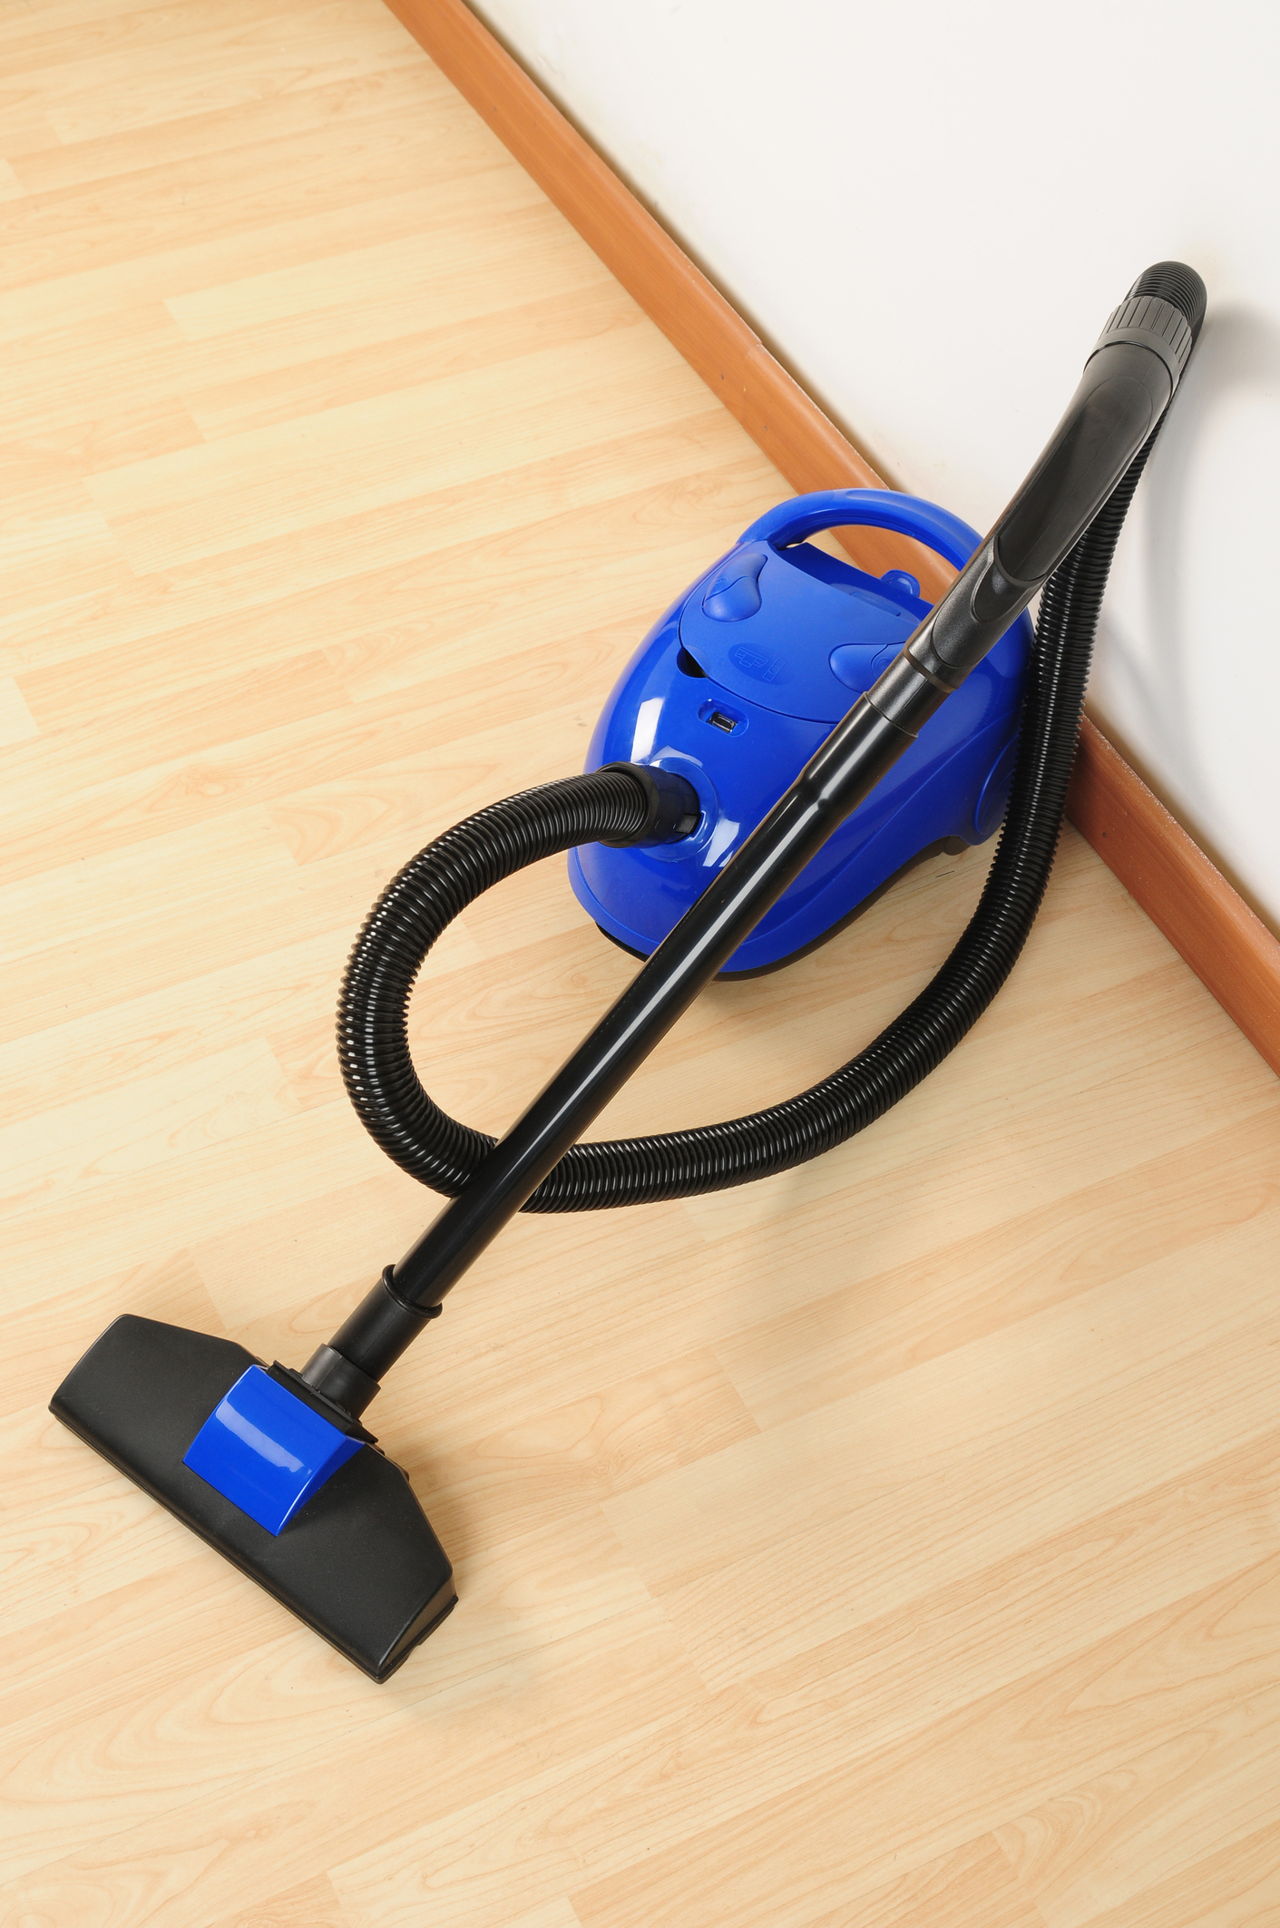 Clean Laminate Floors Without Streaking, Clean Wood Laminate Floors Without Streaks